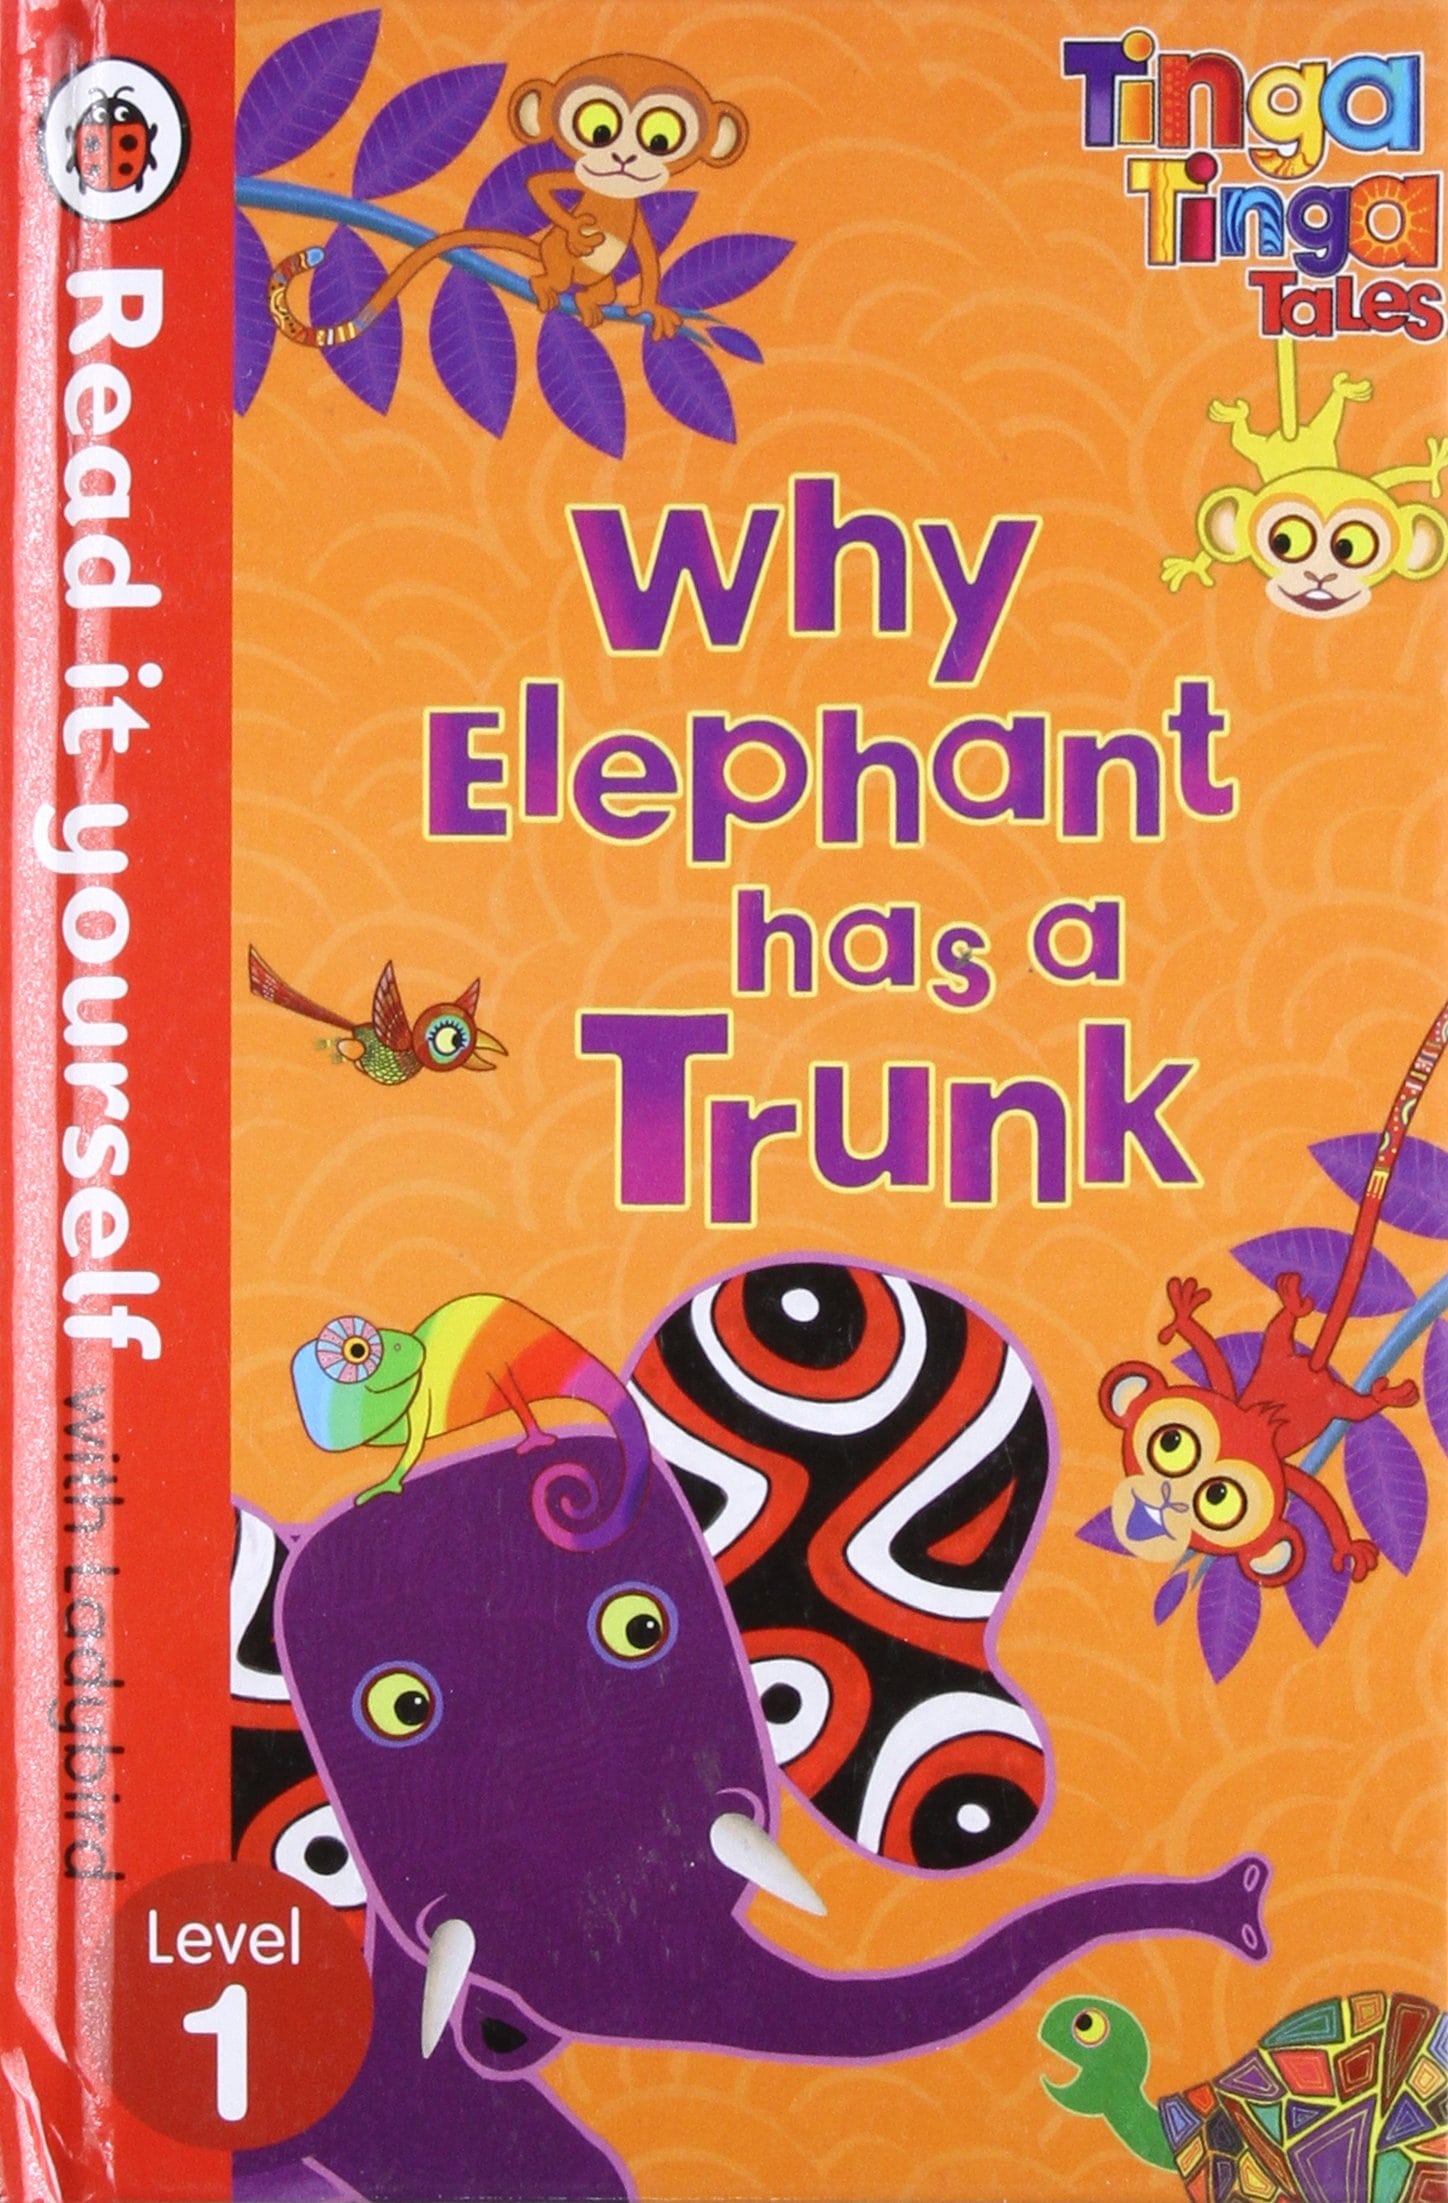 IMG : Why Elephant has a Trunk